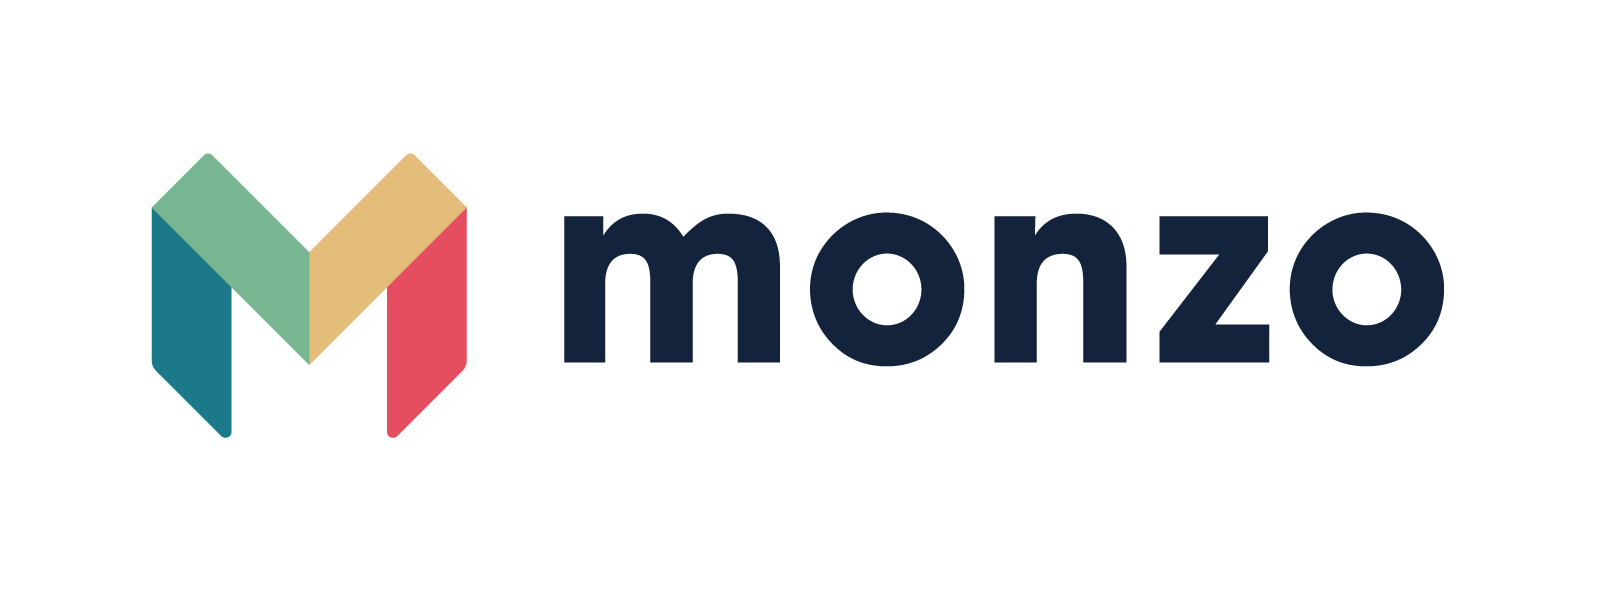 Compare Currency Cards - Monzo card perks include built in savings pots, no atm fees and no charges for spending abroad!